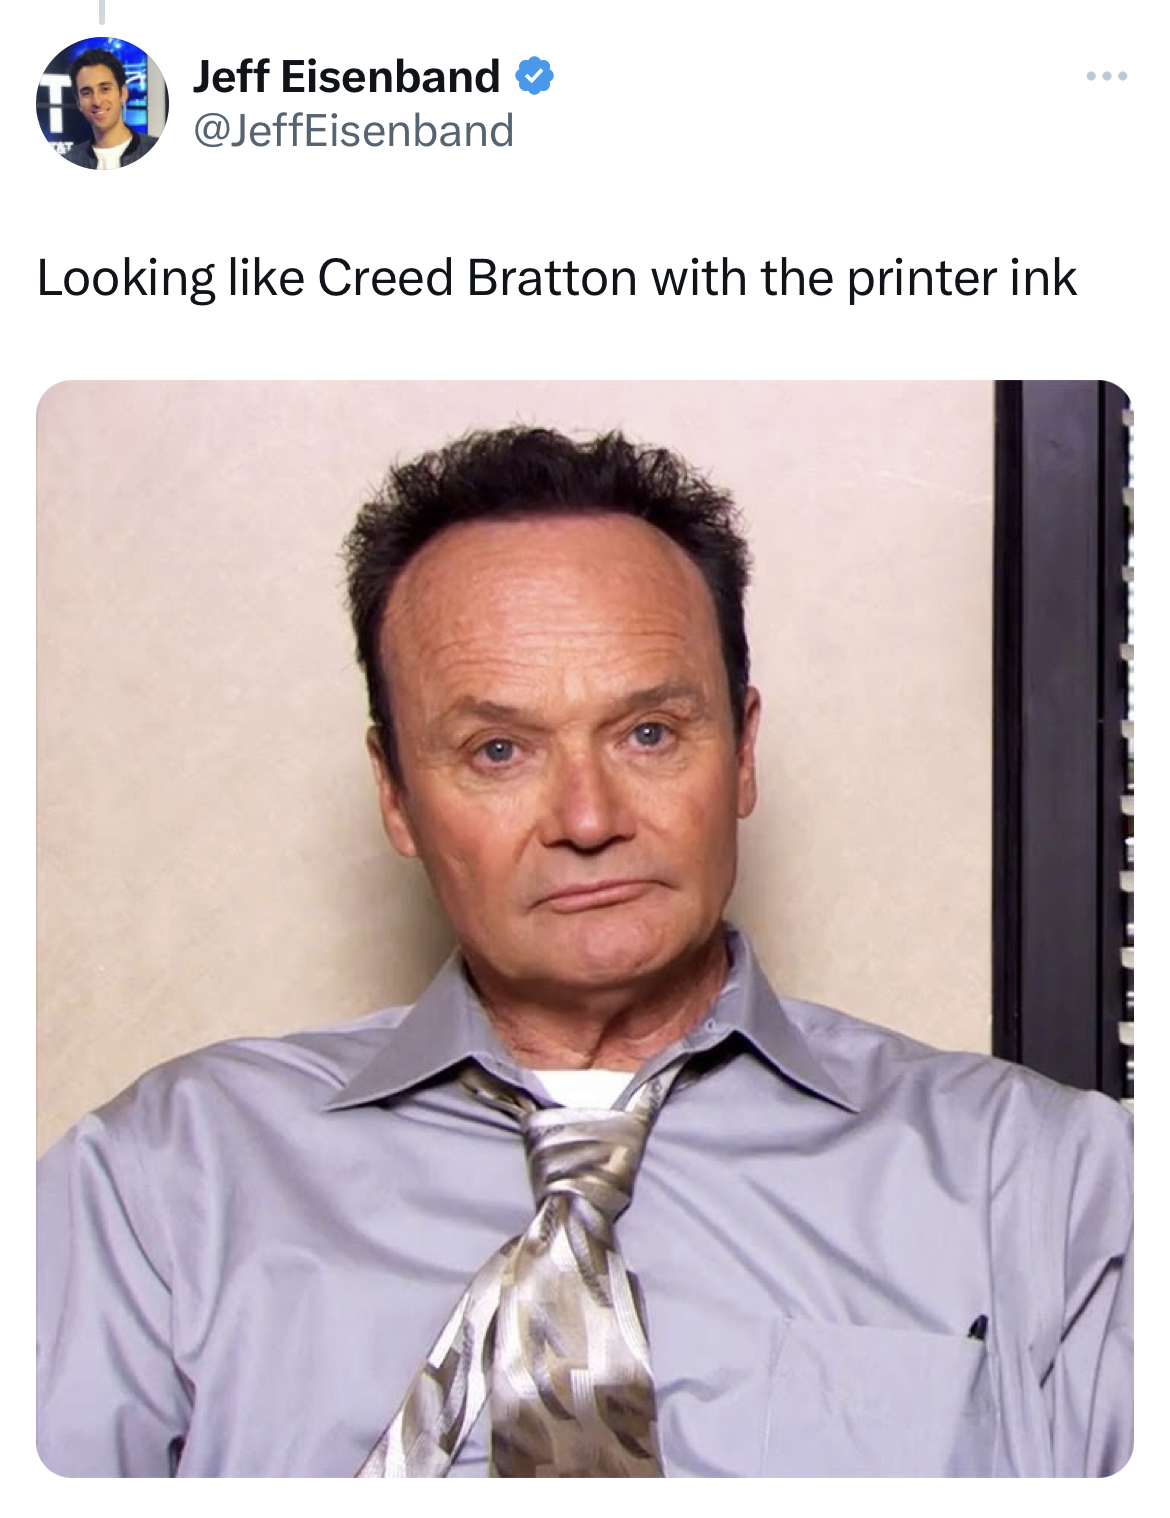 Vince McMahon Mustache memes - creed from the office - Jeff Eisenband Looking Creed Bratton with the printer ink